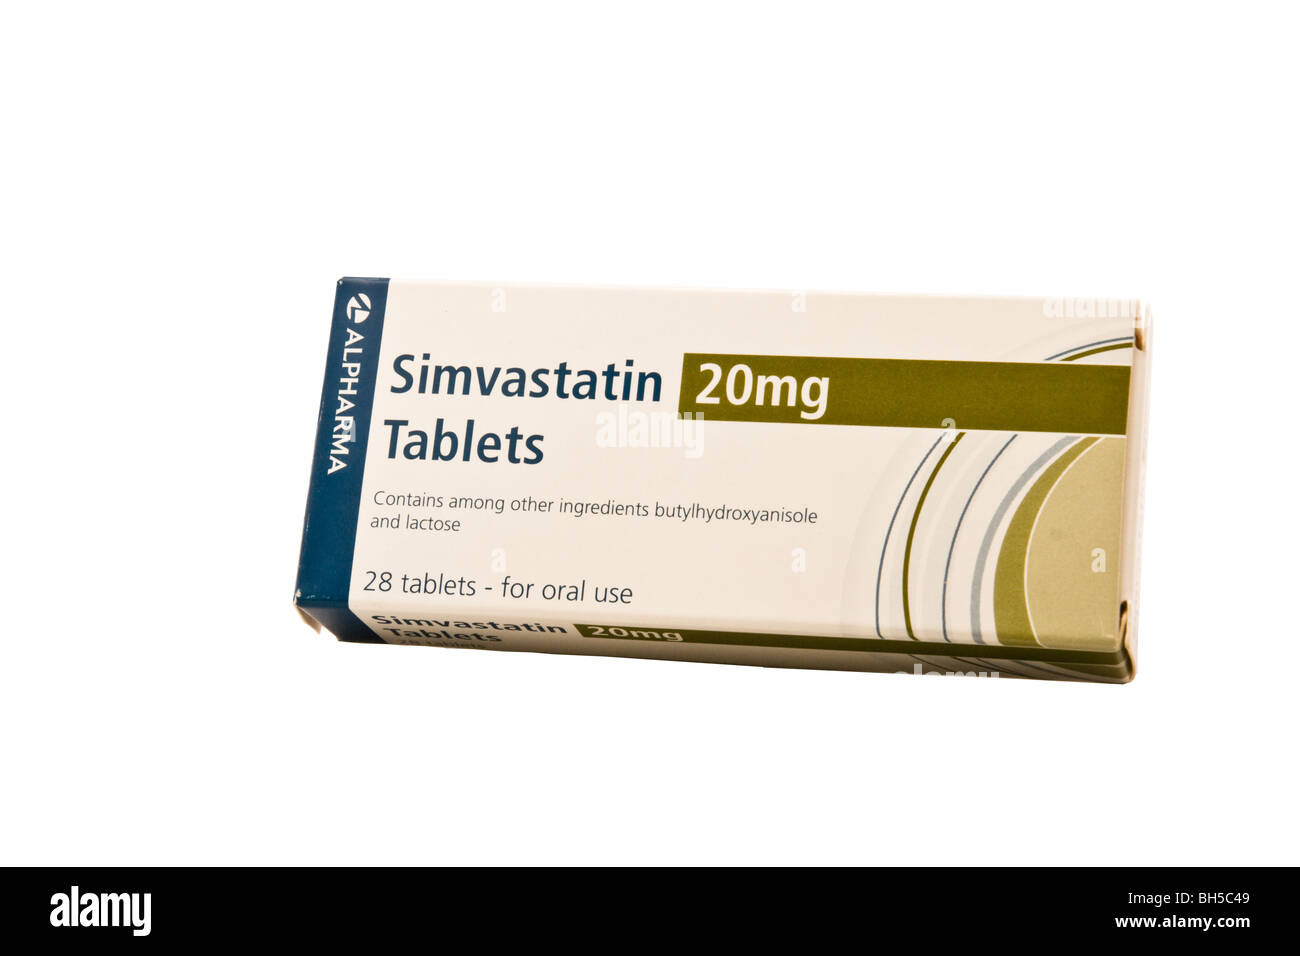 Statin tablets for controlling cholesterol. Stock Photo